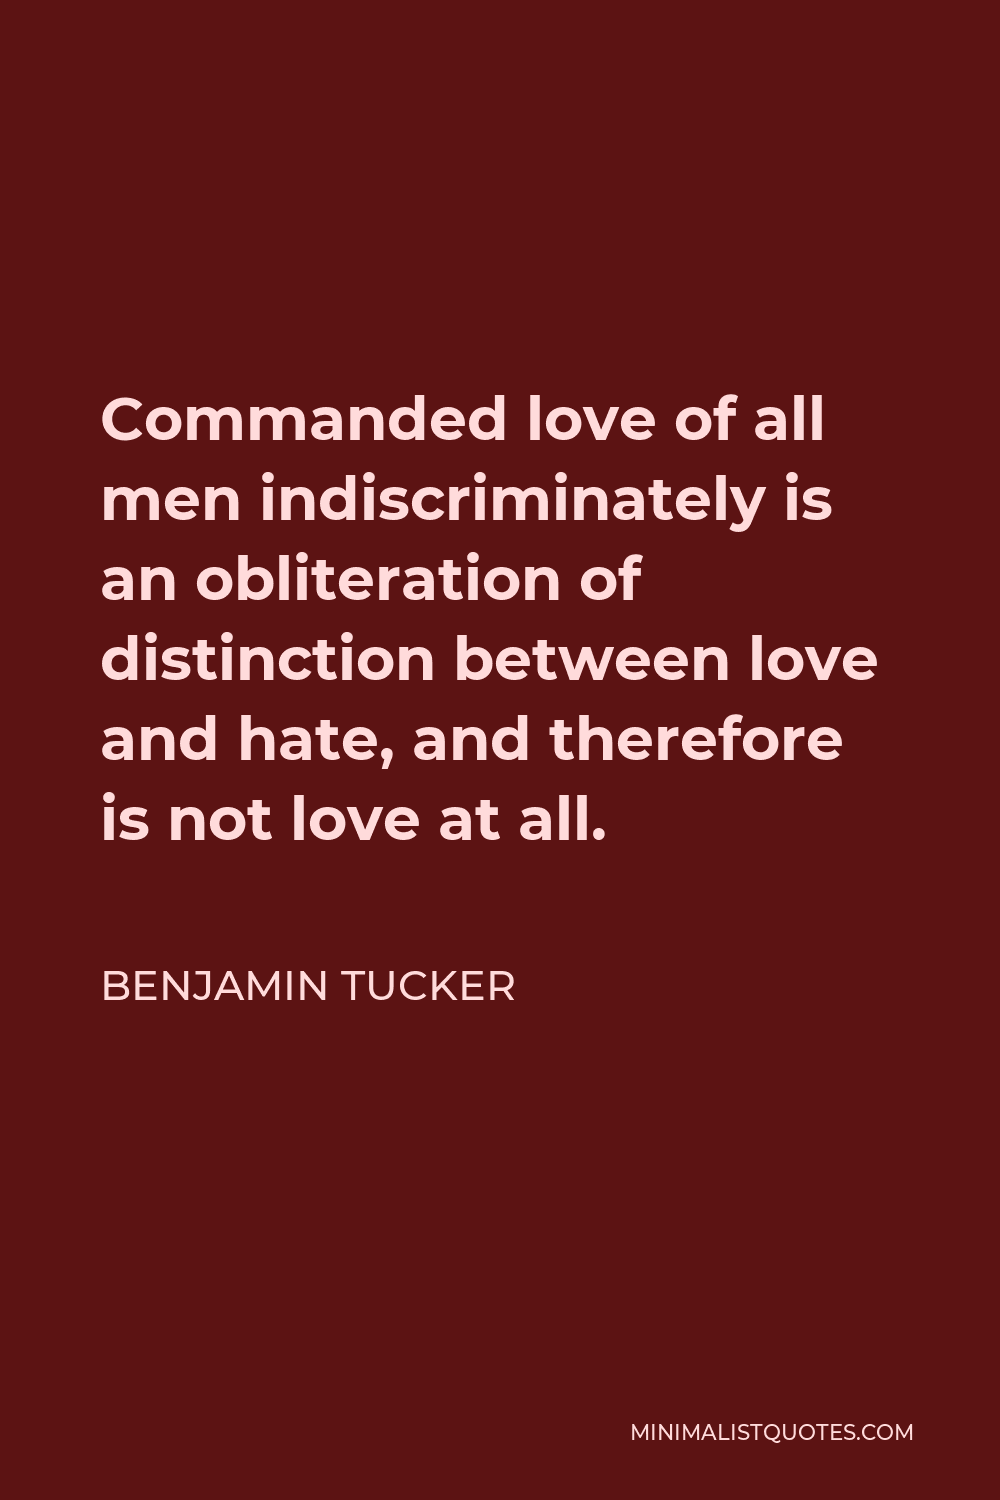 Benjamin Tucker Quote - Commanded love of all men indiscriminately is an obliteration of distinction between love and hate, and therefore is not love at all.